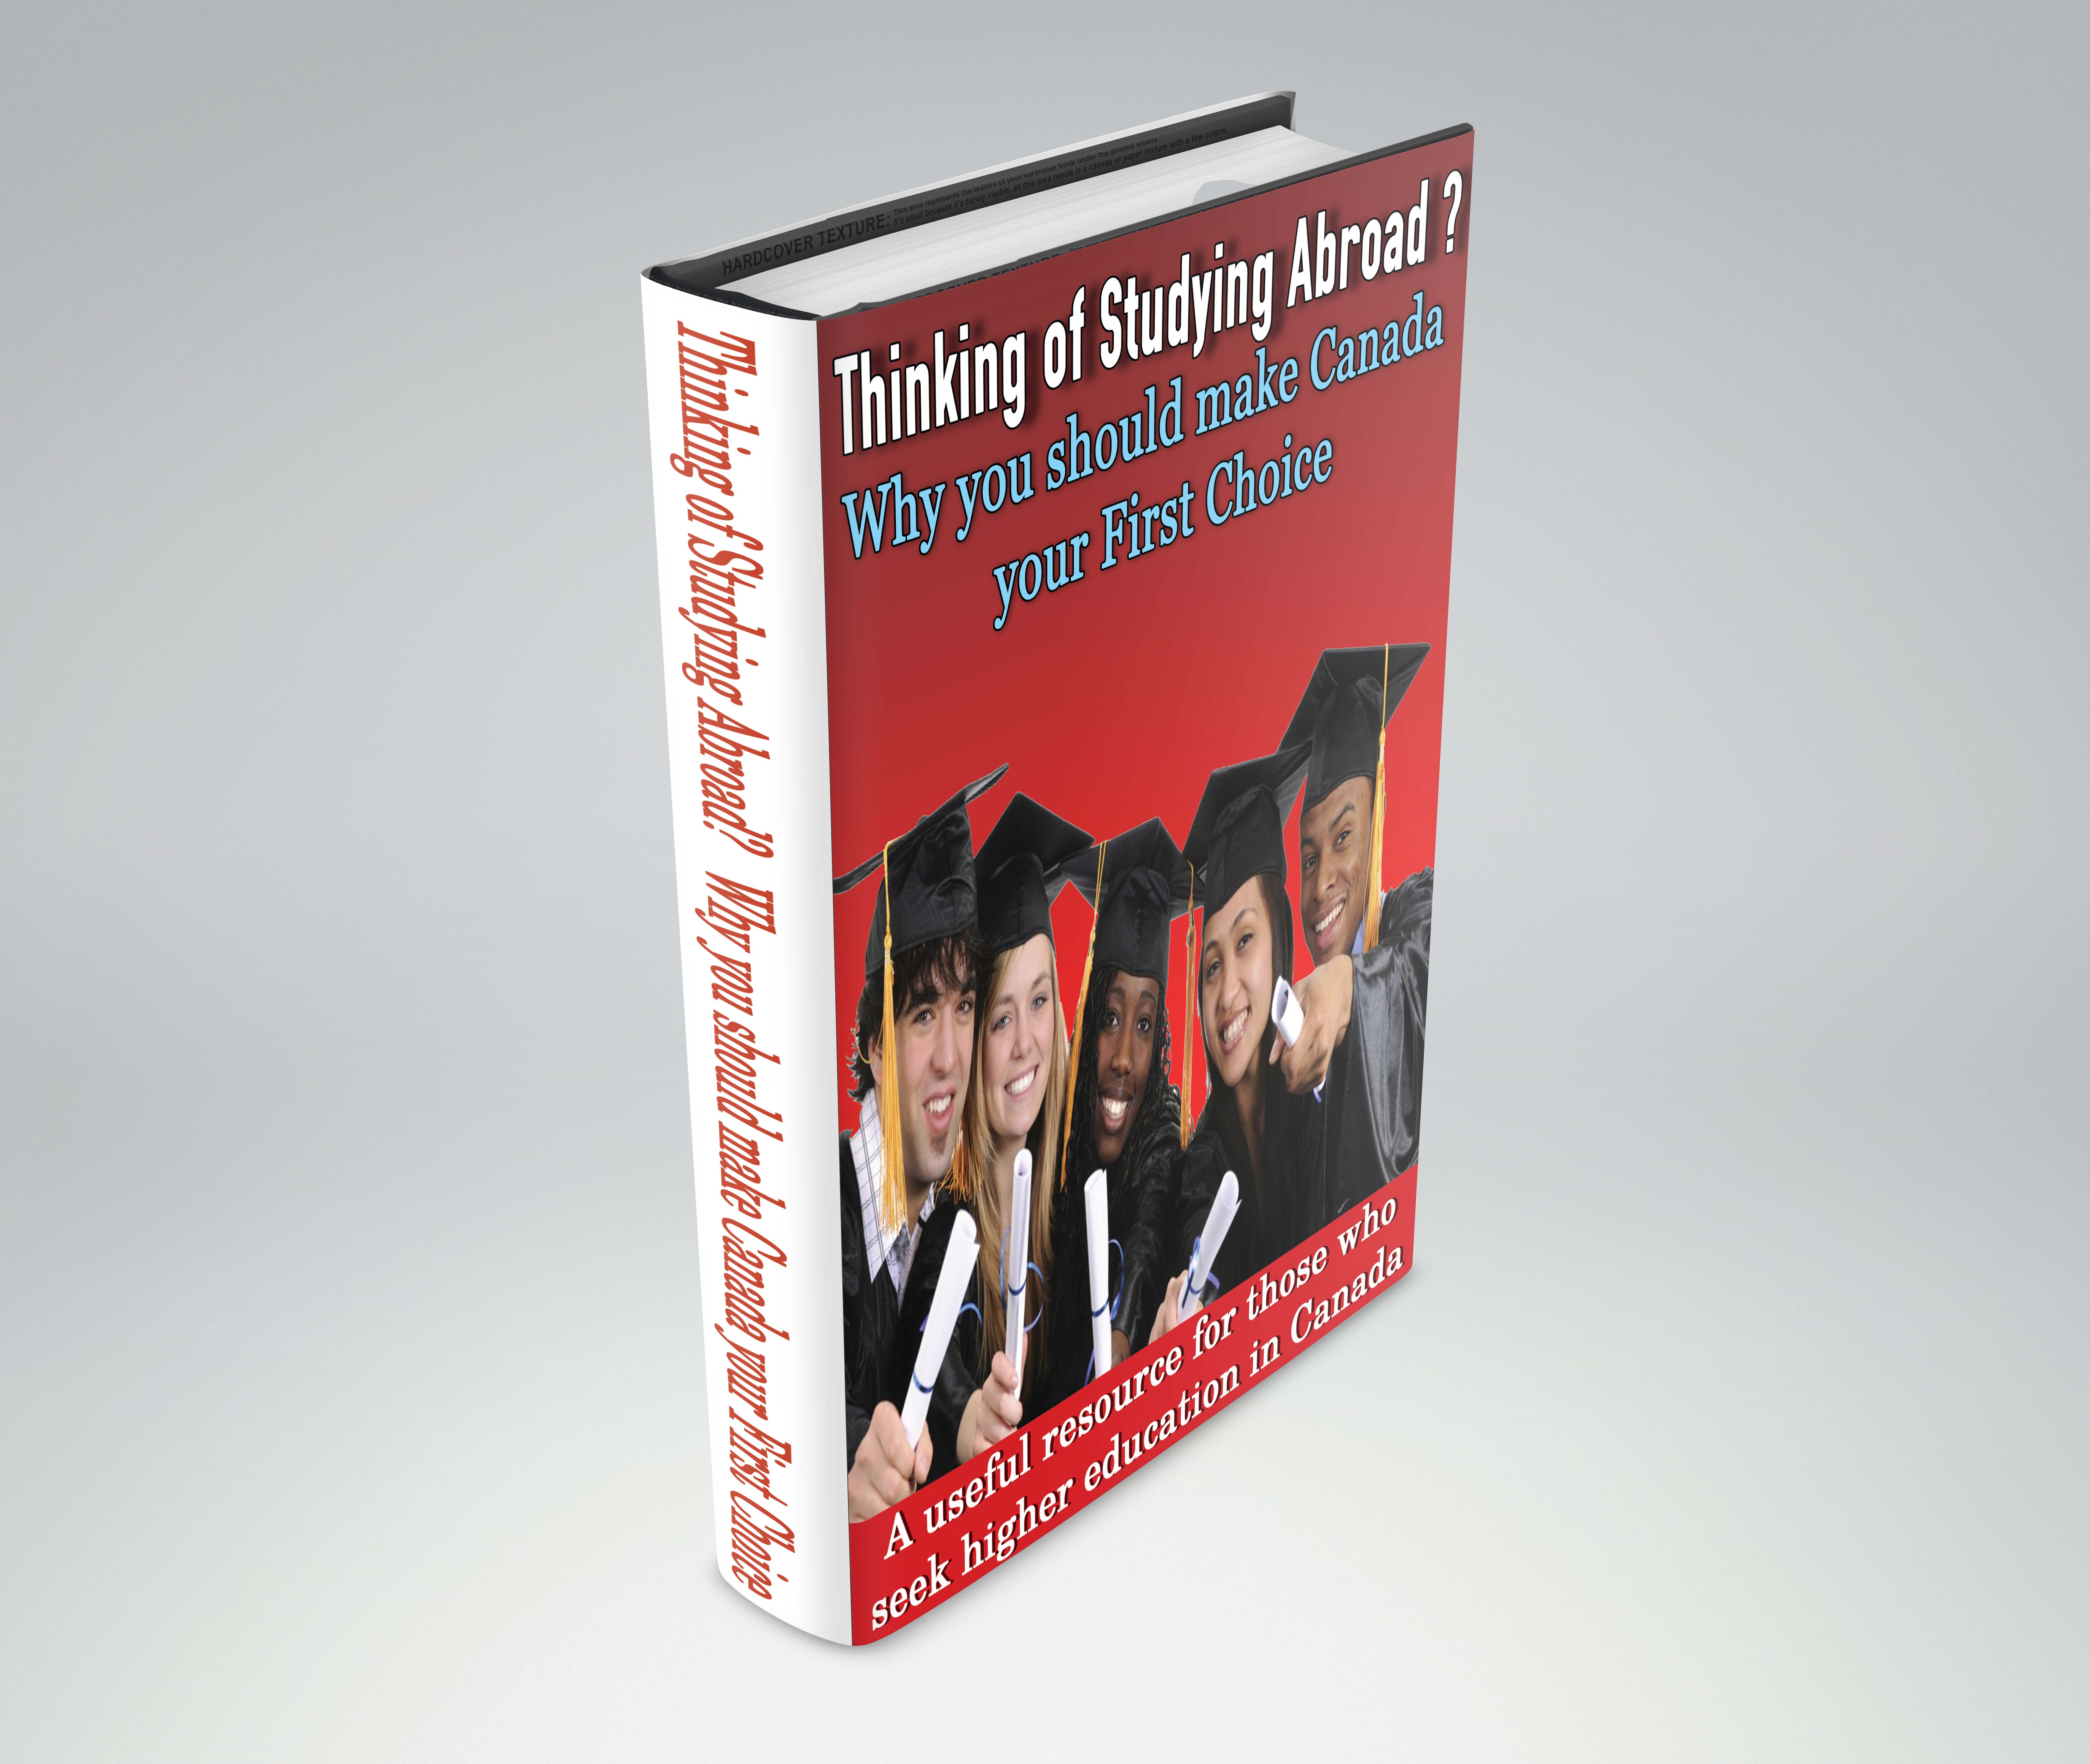 design professional Book COVER for $5 - SEOClerks